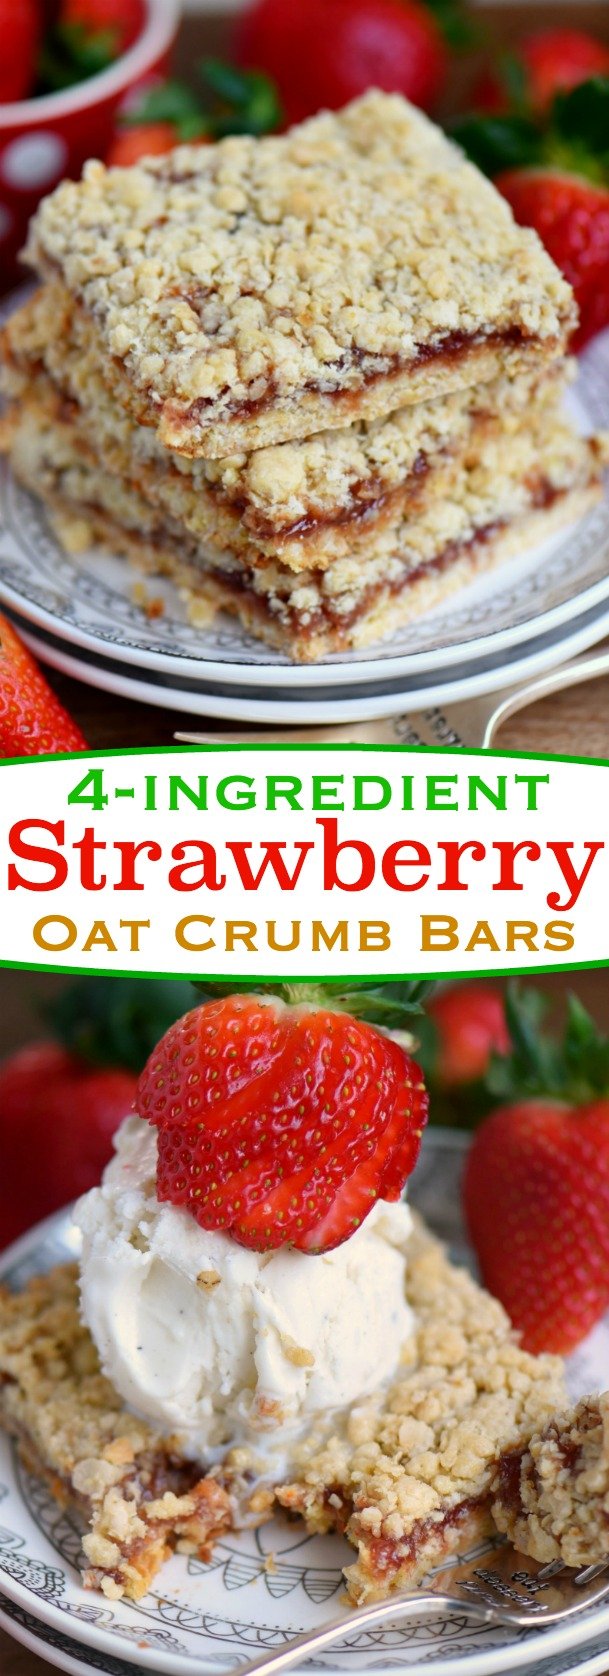 Dessert has never been easier or more delicious than with these 4 Ingredient Strawberry Oat Crumb Bars! Serve warm with ice cream for an exceptionally delicious treat! // Mom On Timeout